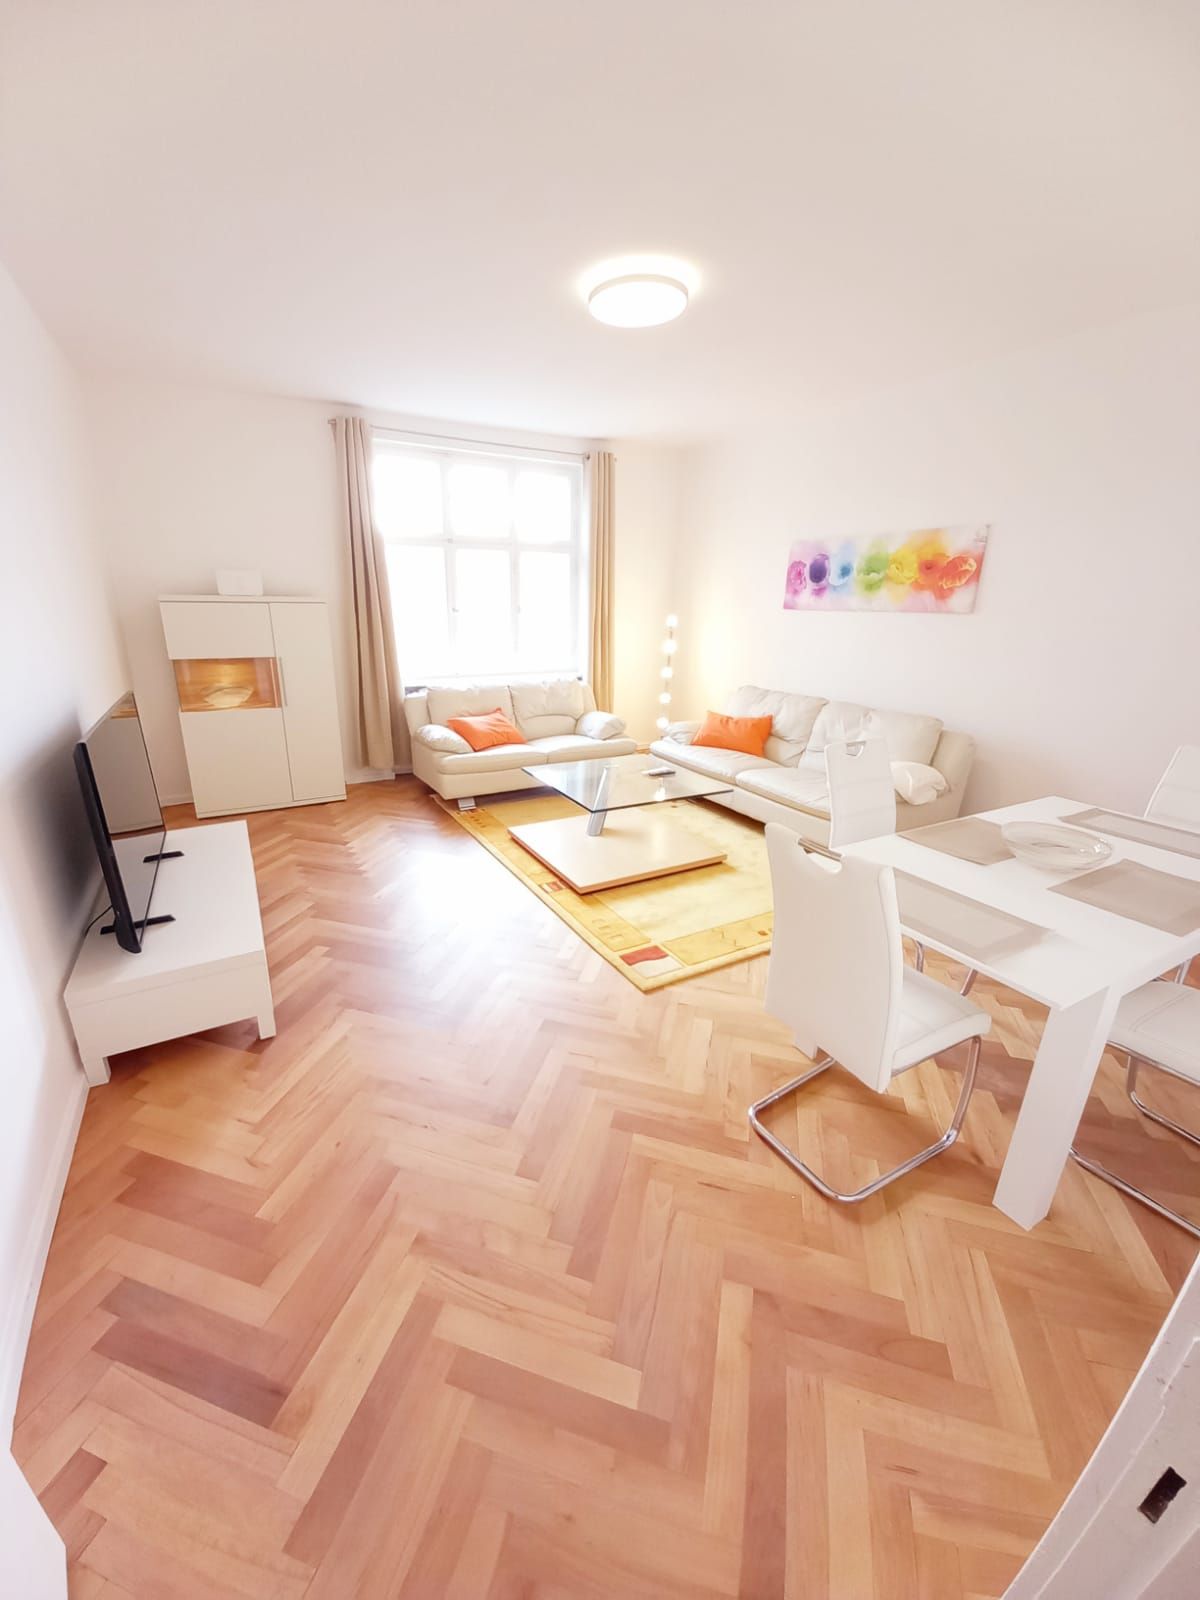 Completely new renovated in Steglitz ( Berlin)